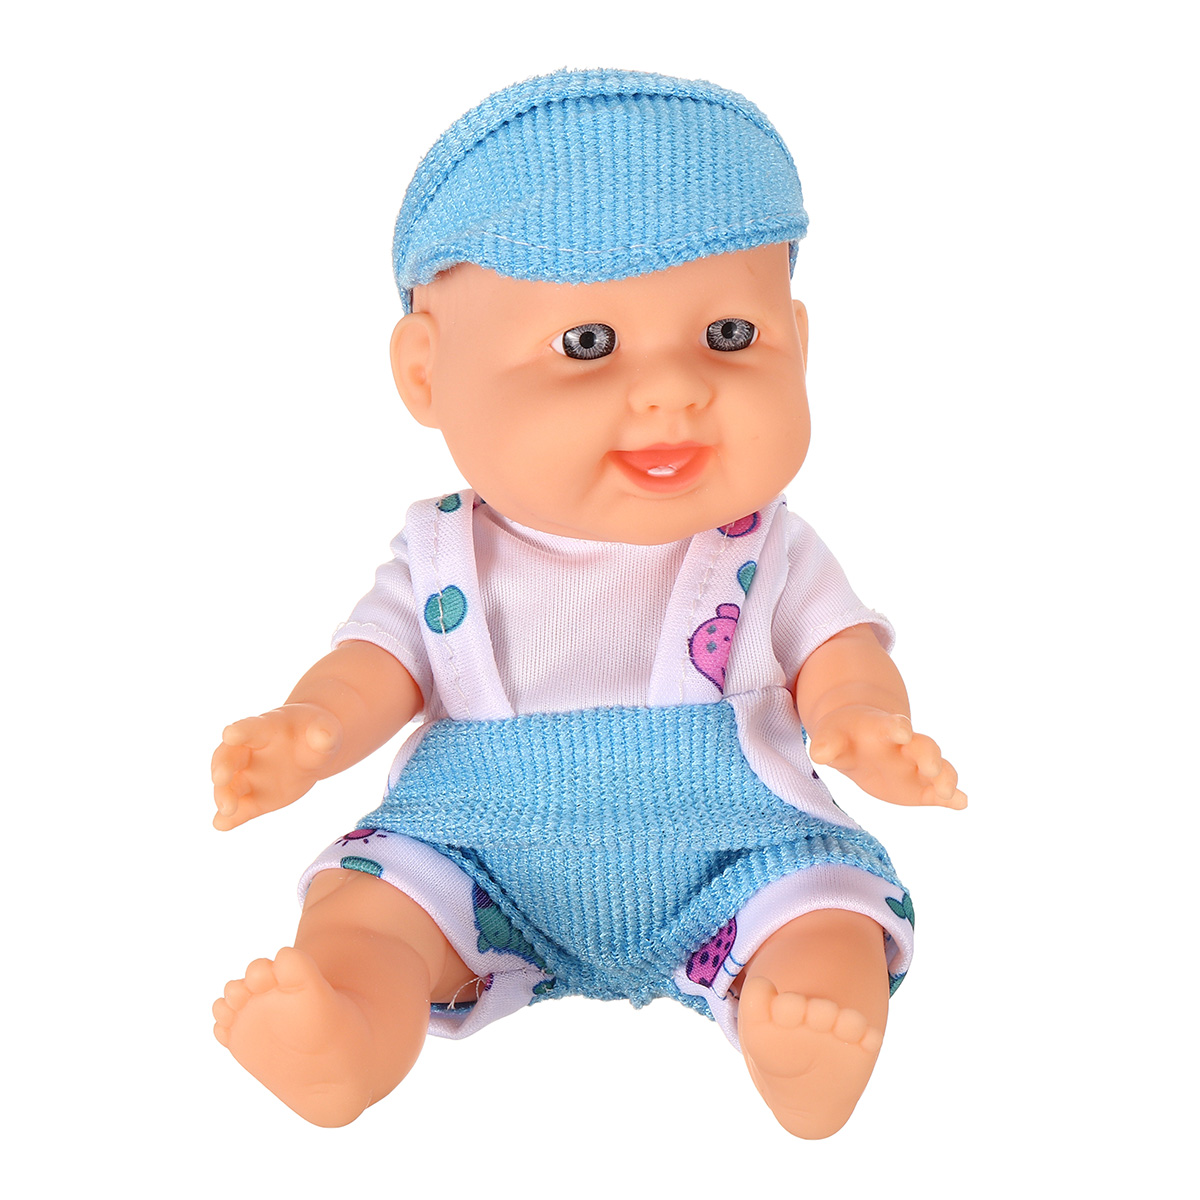 Simulation-Baby-3D-Creative-Cute-Doll-Play-House-Toy-Doll-Vinyl-Doll-Gift-1818656-13